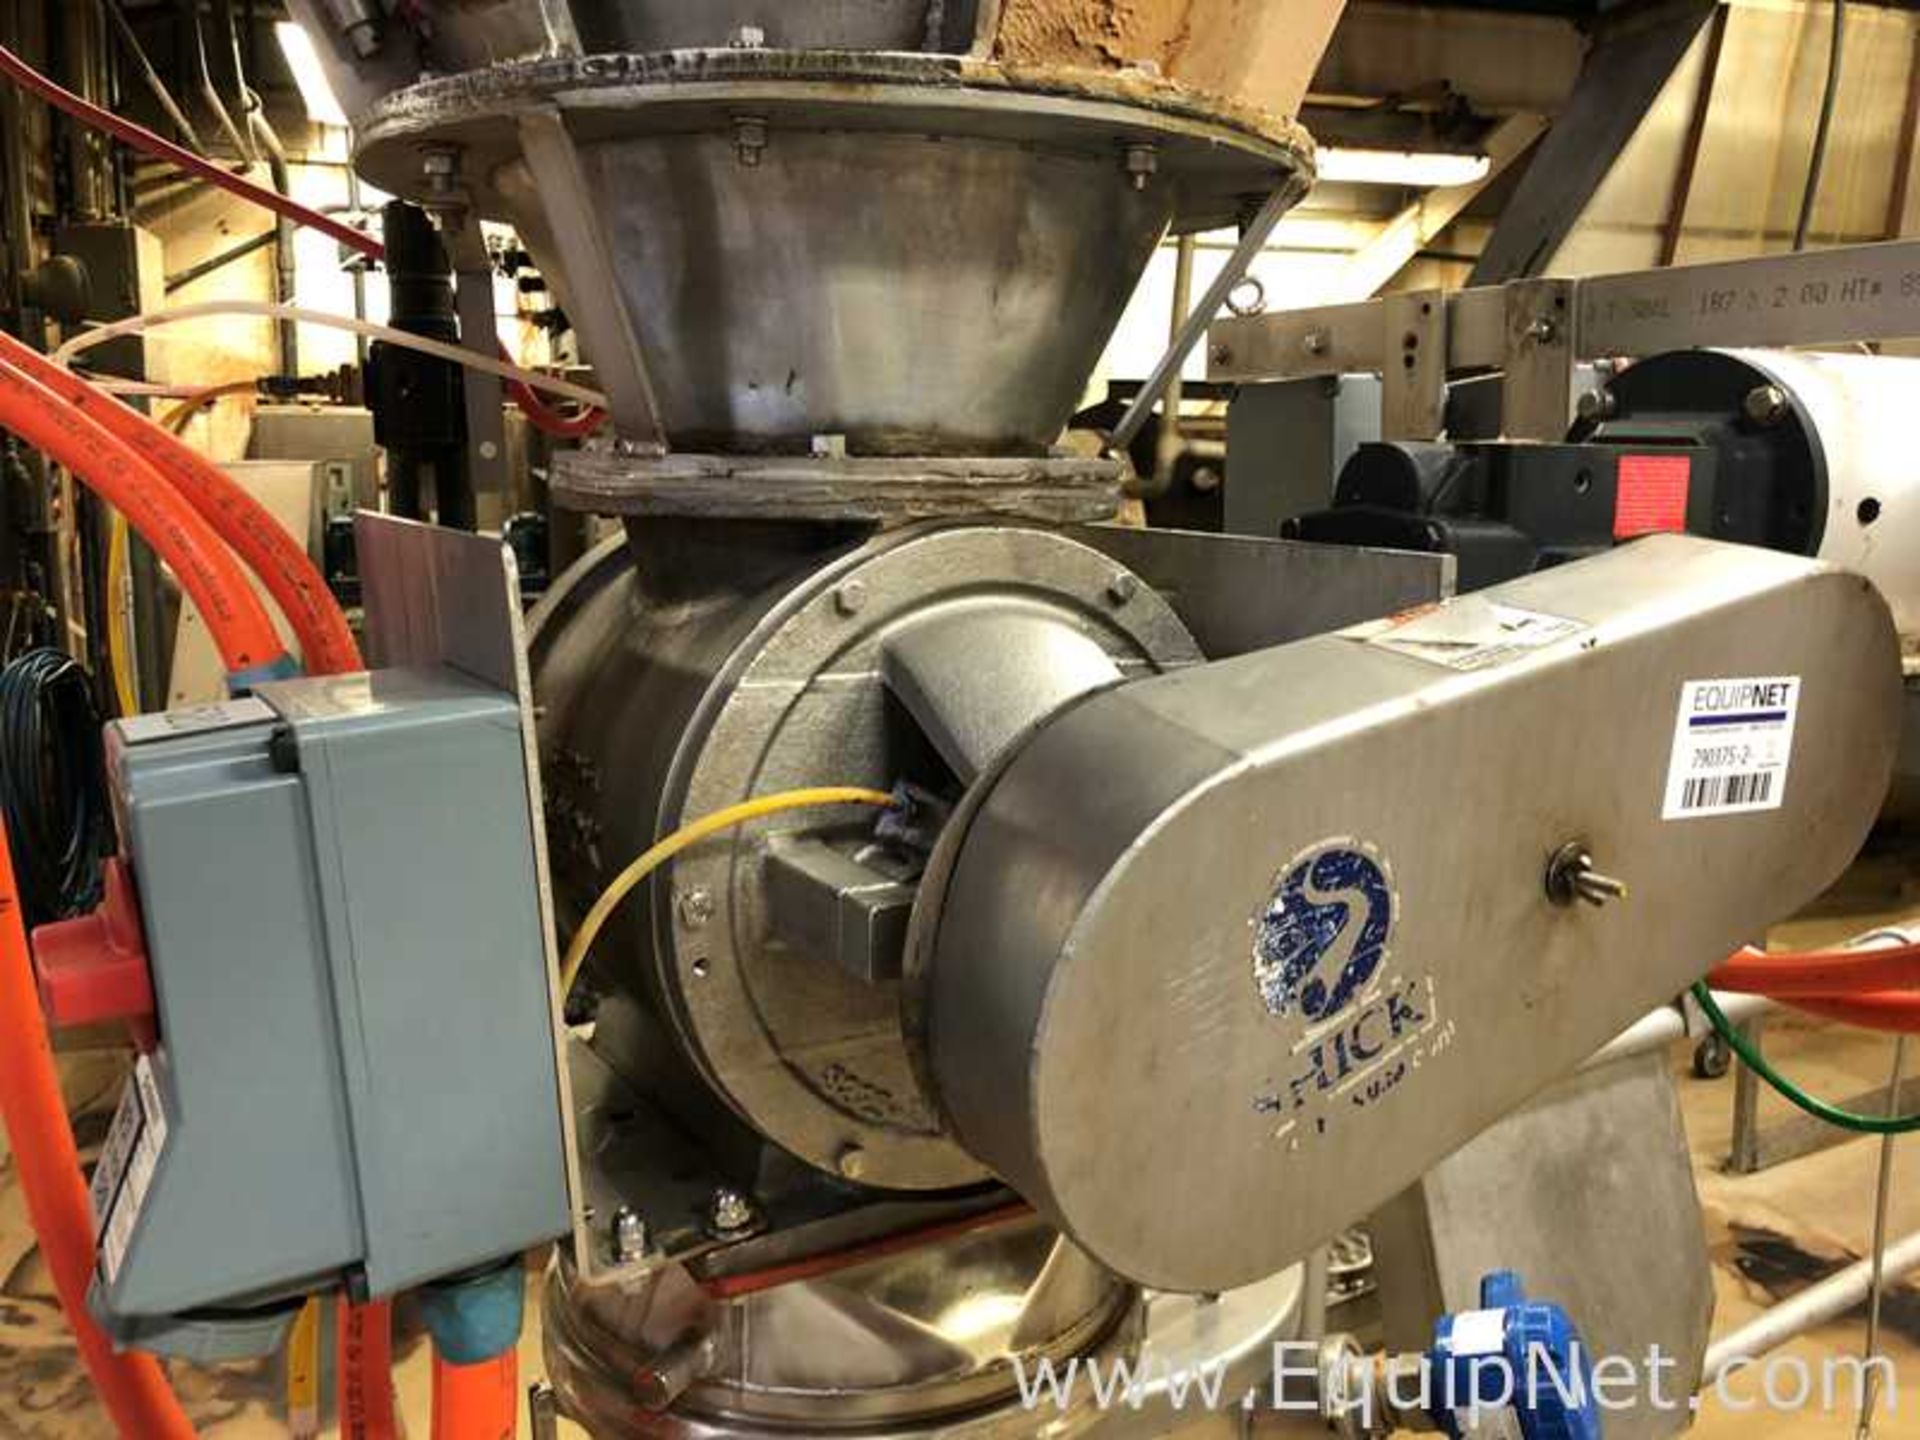 One Vacuum Conveyor System Vac-U-Max With Hopper And One Shick S-225-1 Rotary Valve - Image 13 of 14